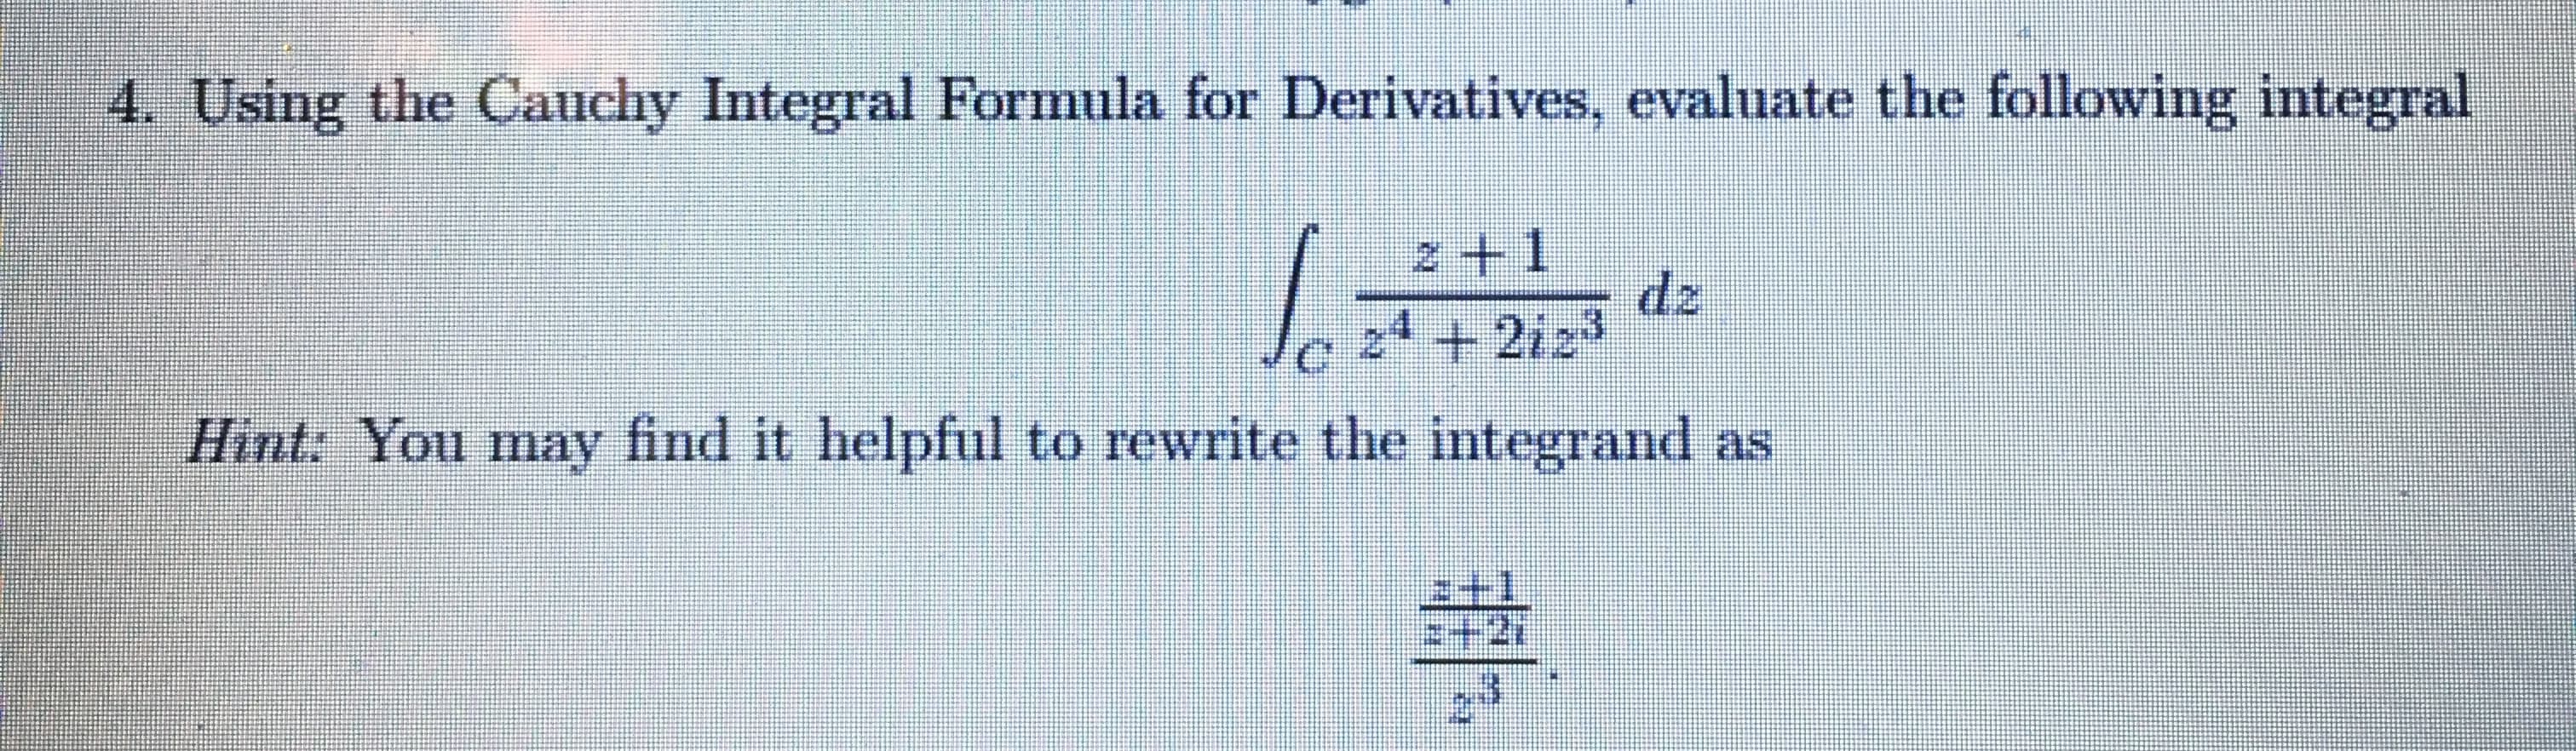 4. Using the Cauchy Integral Formula for Derivatives, evaluate the following integral
2 +1
dz
2 + 2iz3
